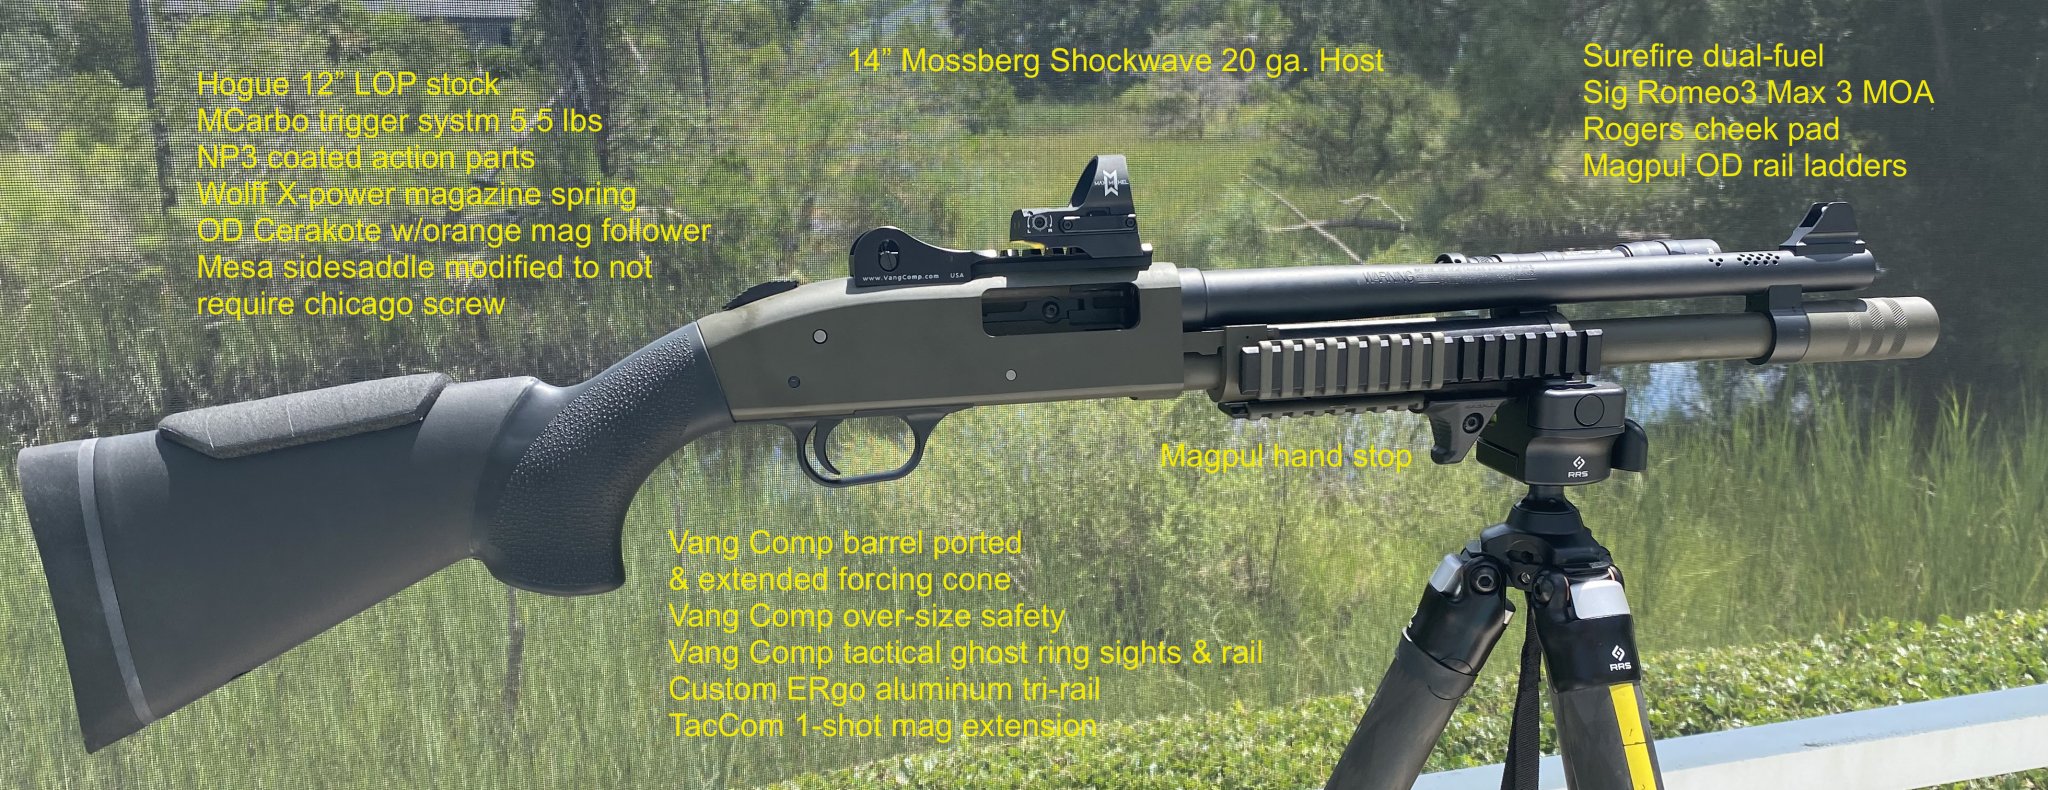 IMG_0499MOSSBERG 590 SHOCKWAVE ROMEO3 MAX RRS TRIPOD POOLSIDE 08.21.21 ANNOTATED copy.jpg